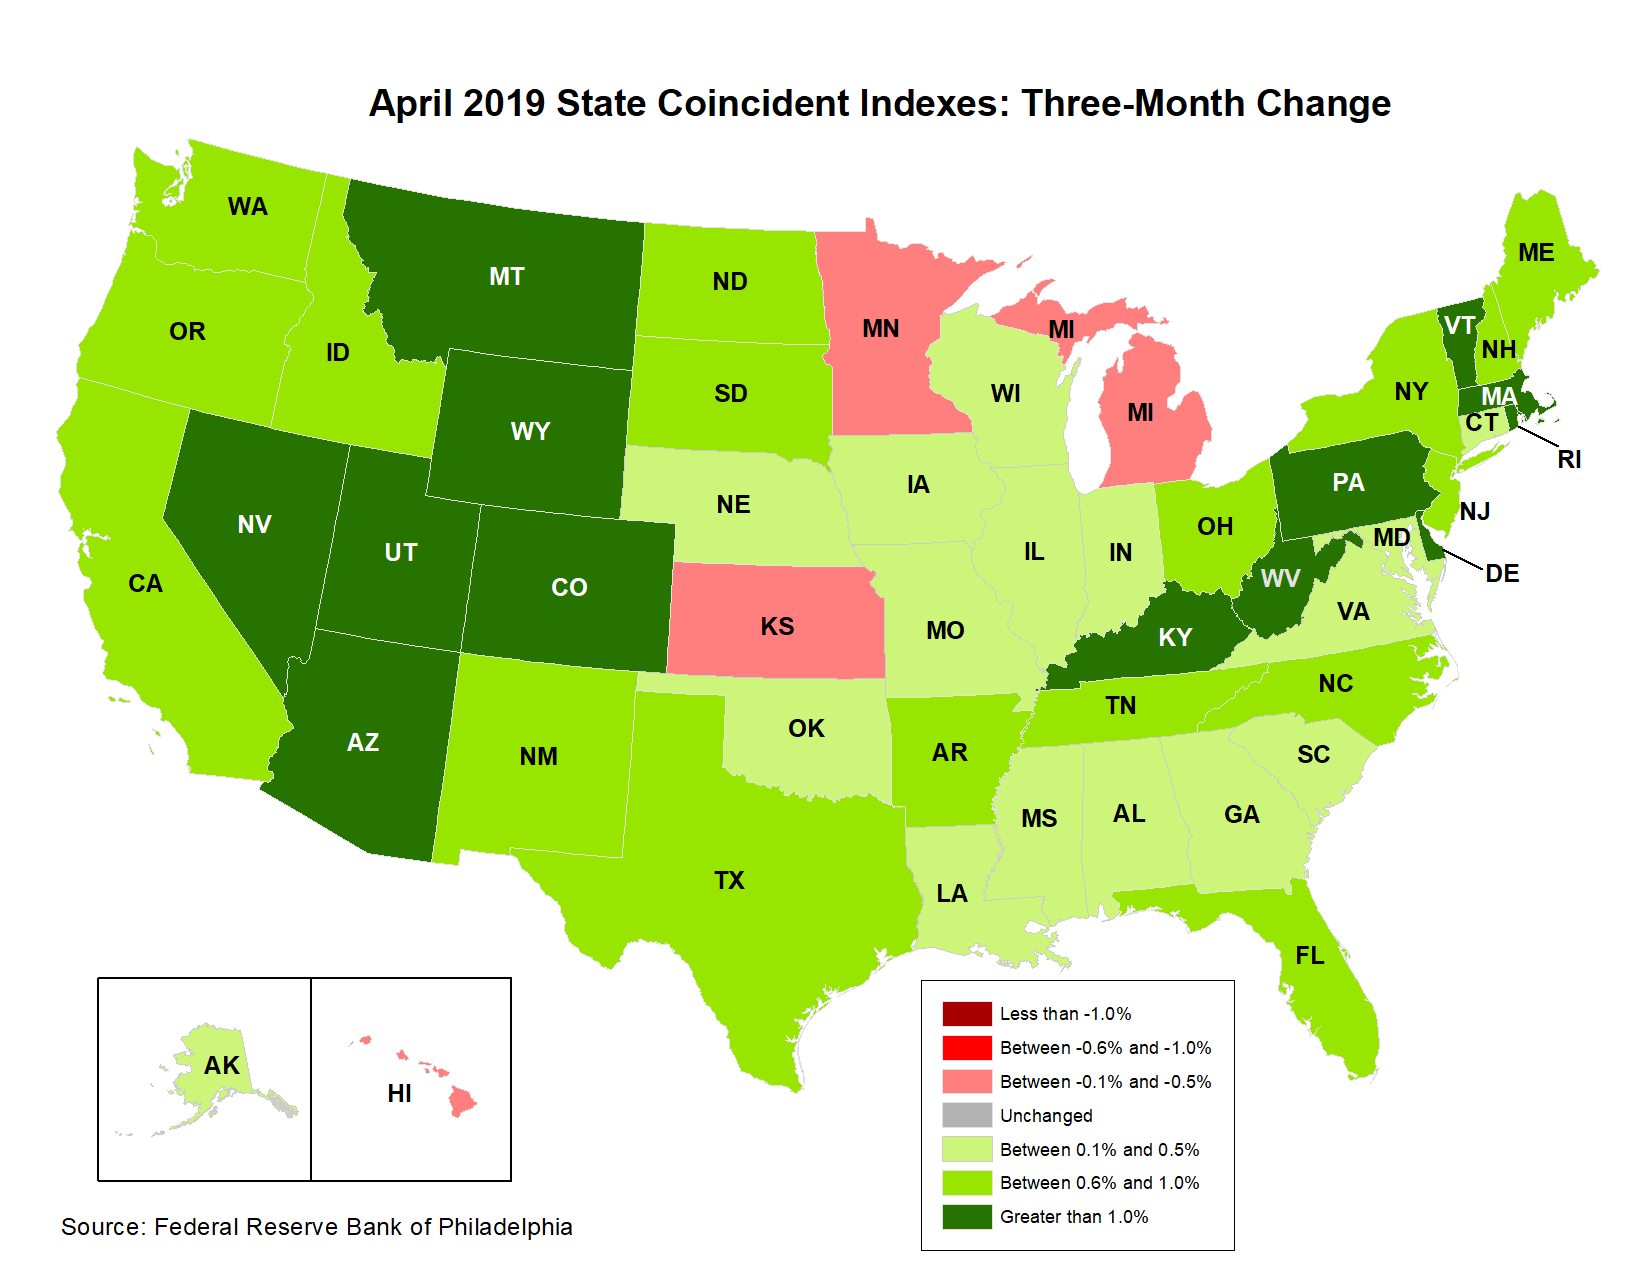 Map of the U.S. showing the State Coincident Indexes Three-Month Change in April 2019